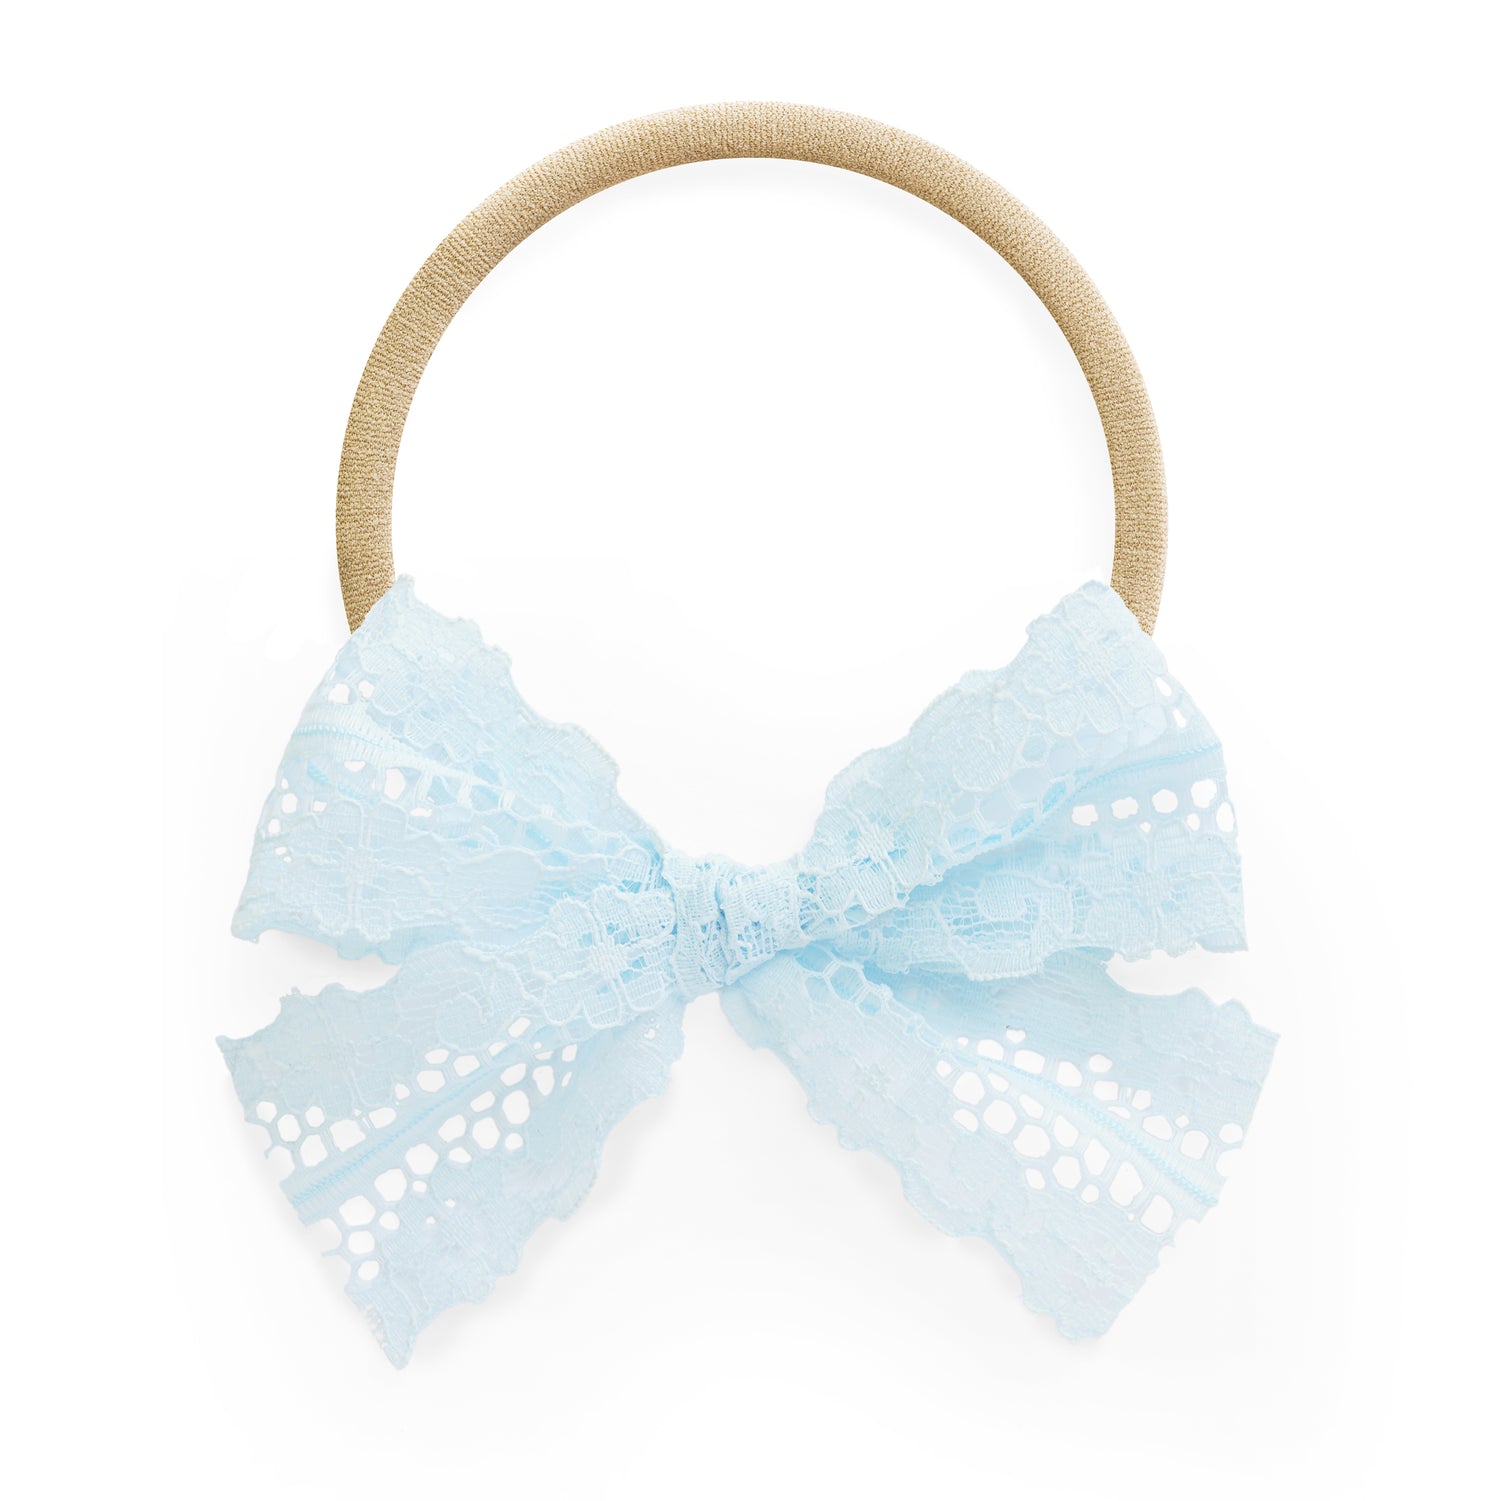 stretchy nylon headband for babies in light blue sky blue lace